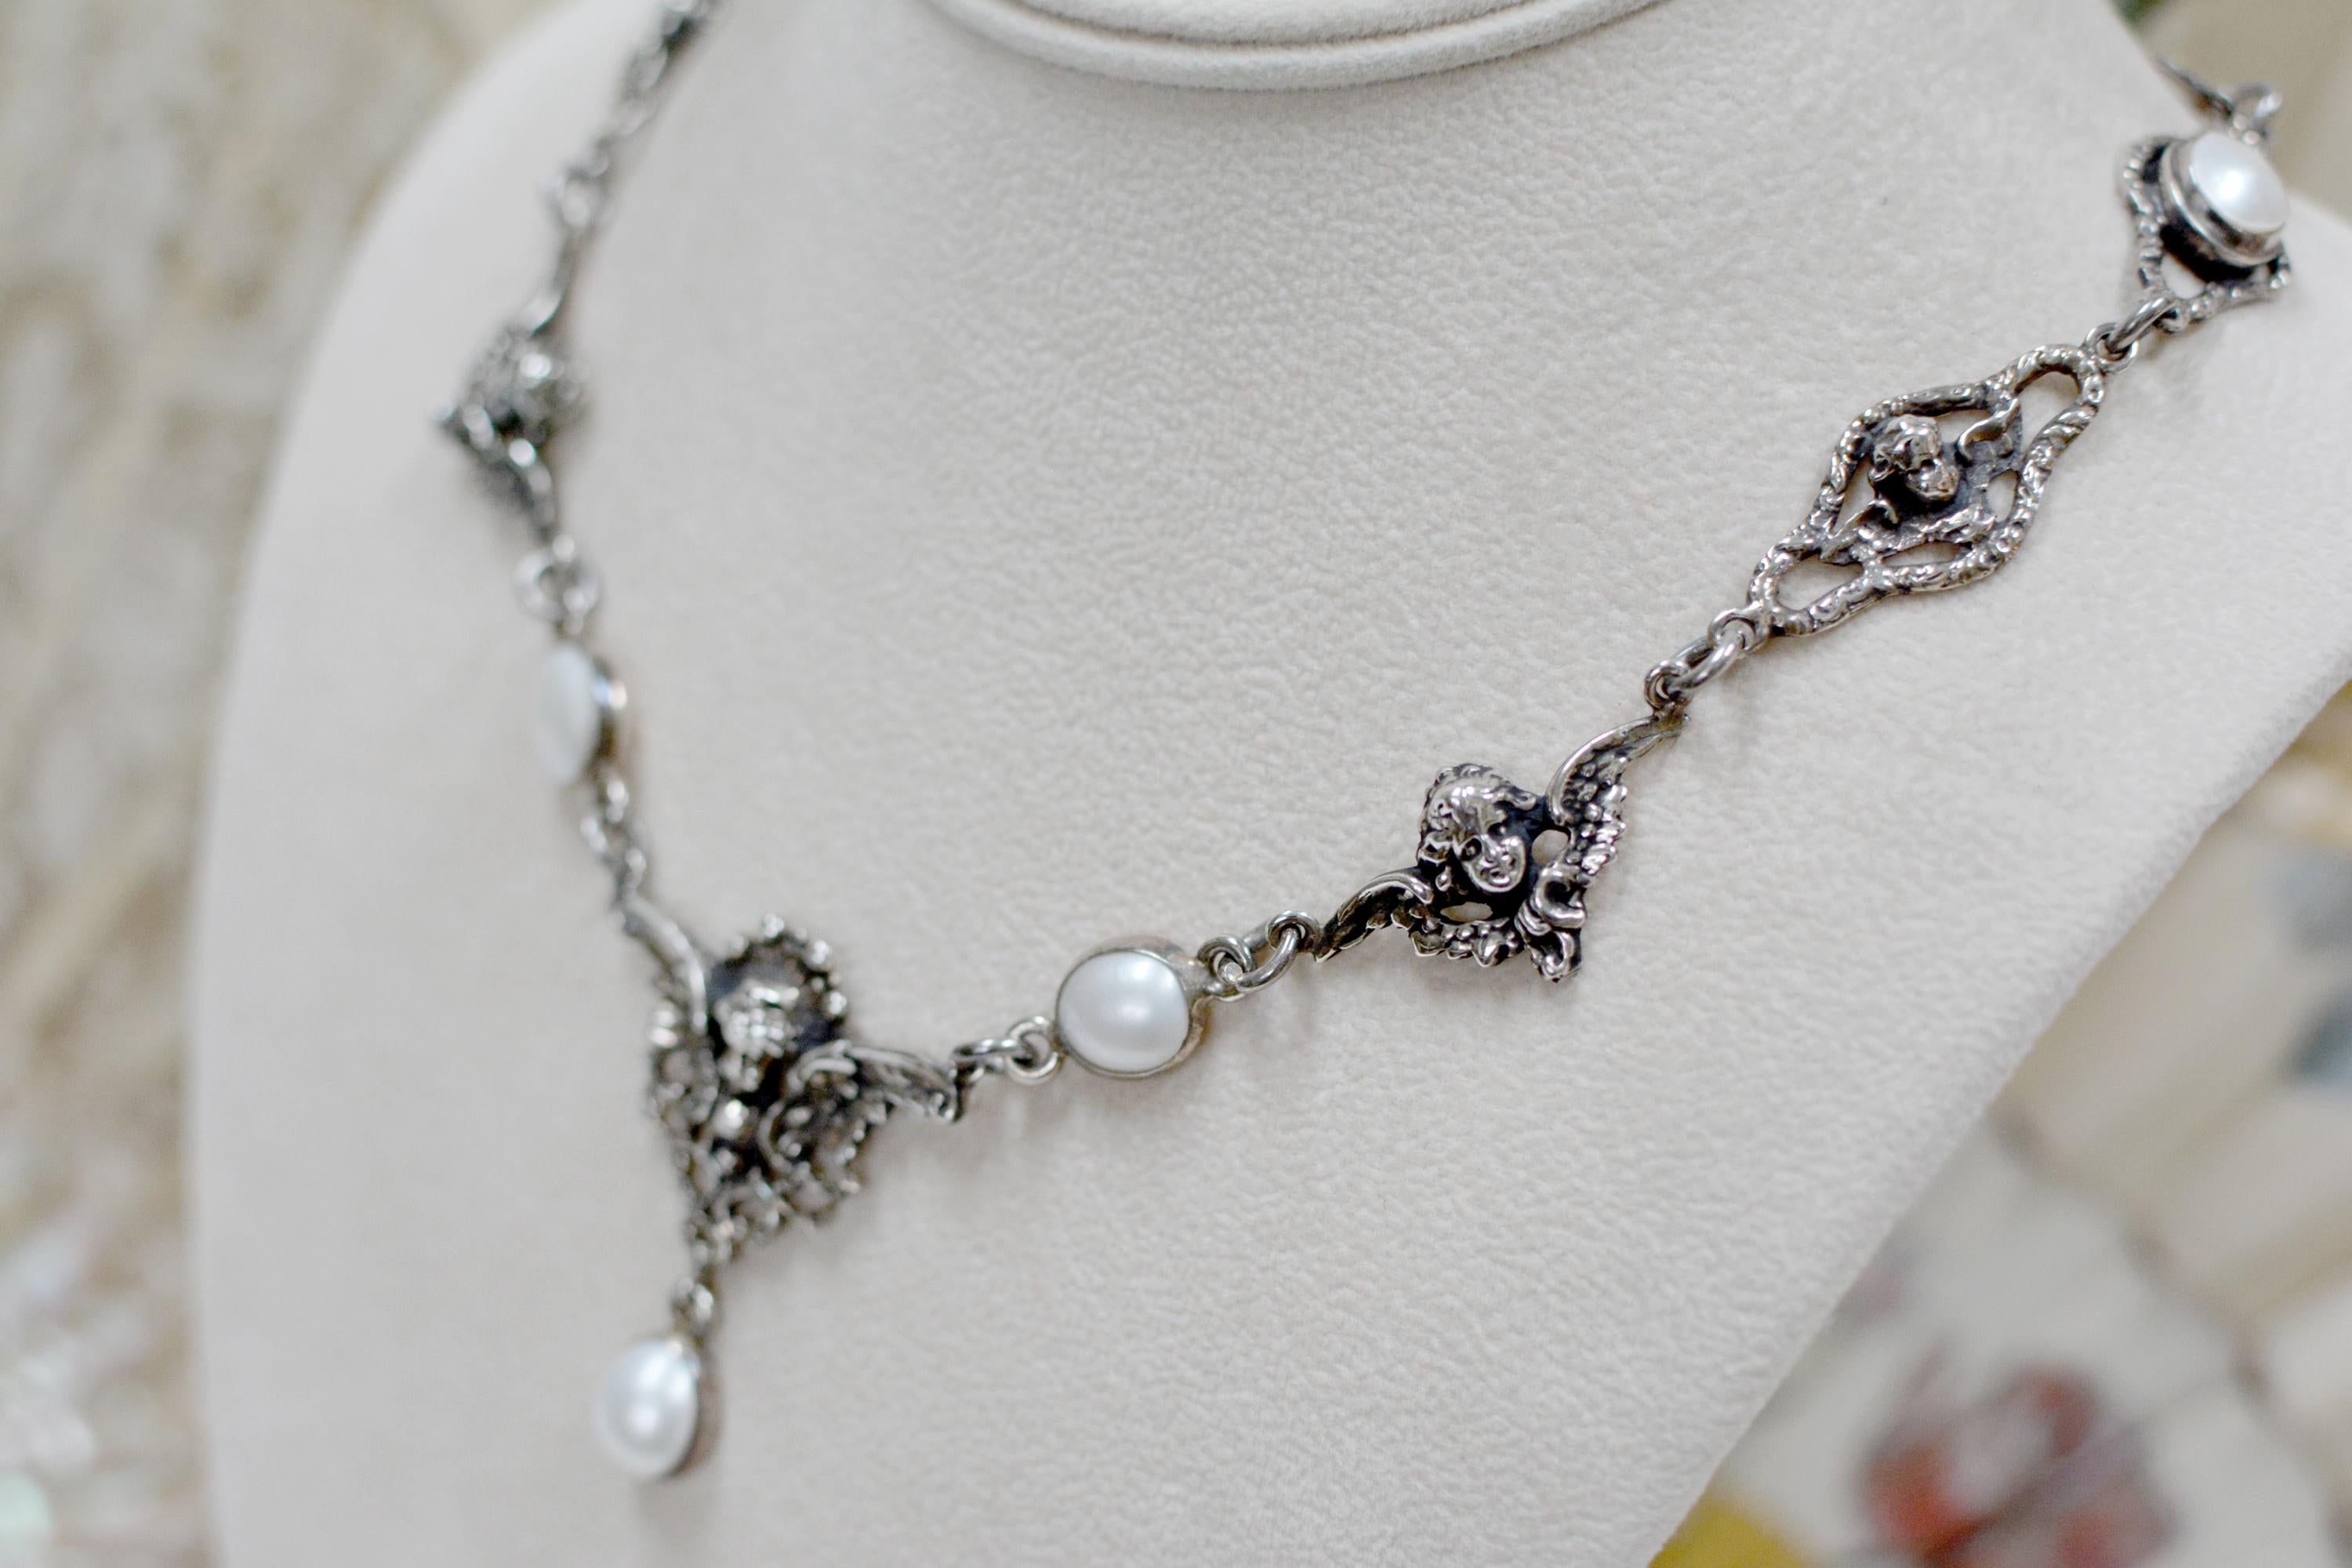 Women's or Men's Jill Garber Collection Drop Necklace with Figural Angels and Freshwater Pearls